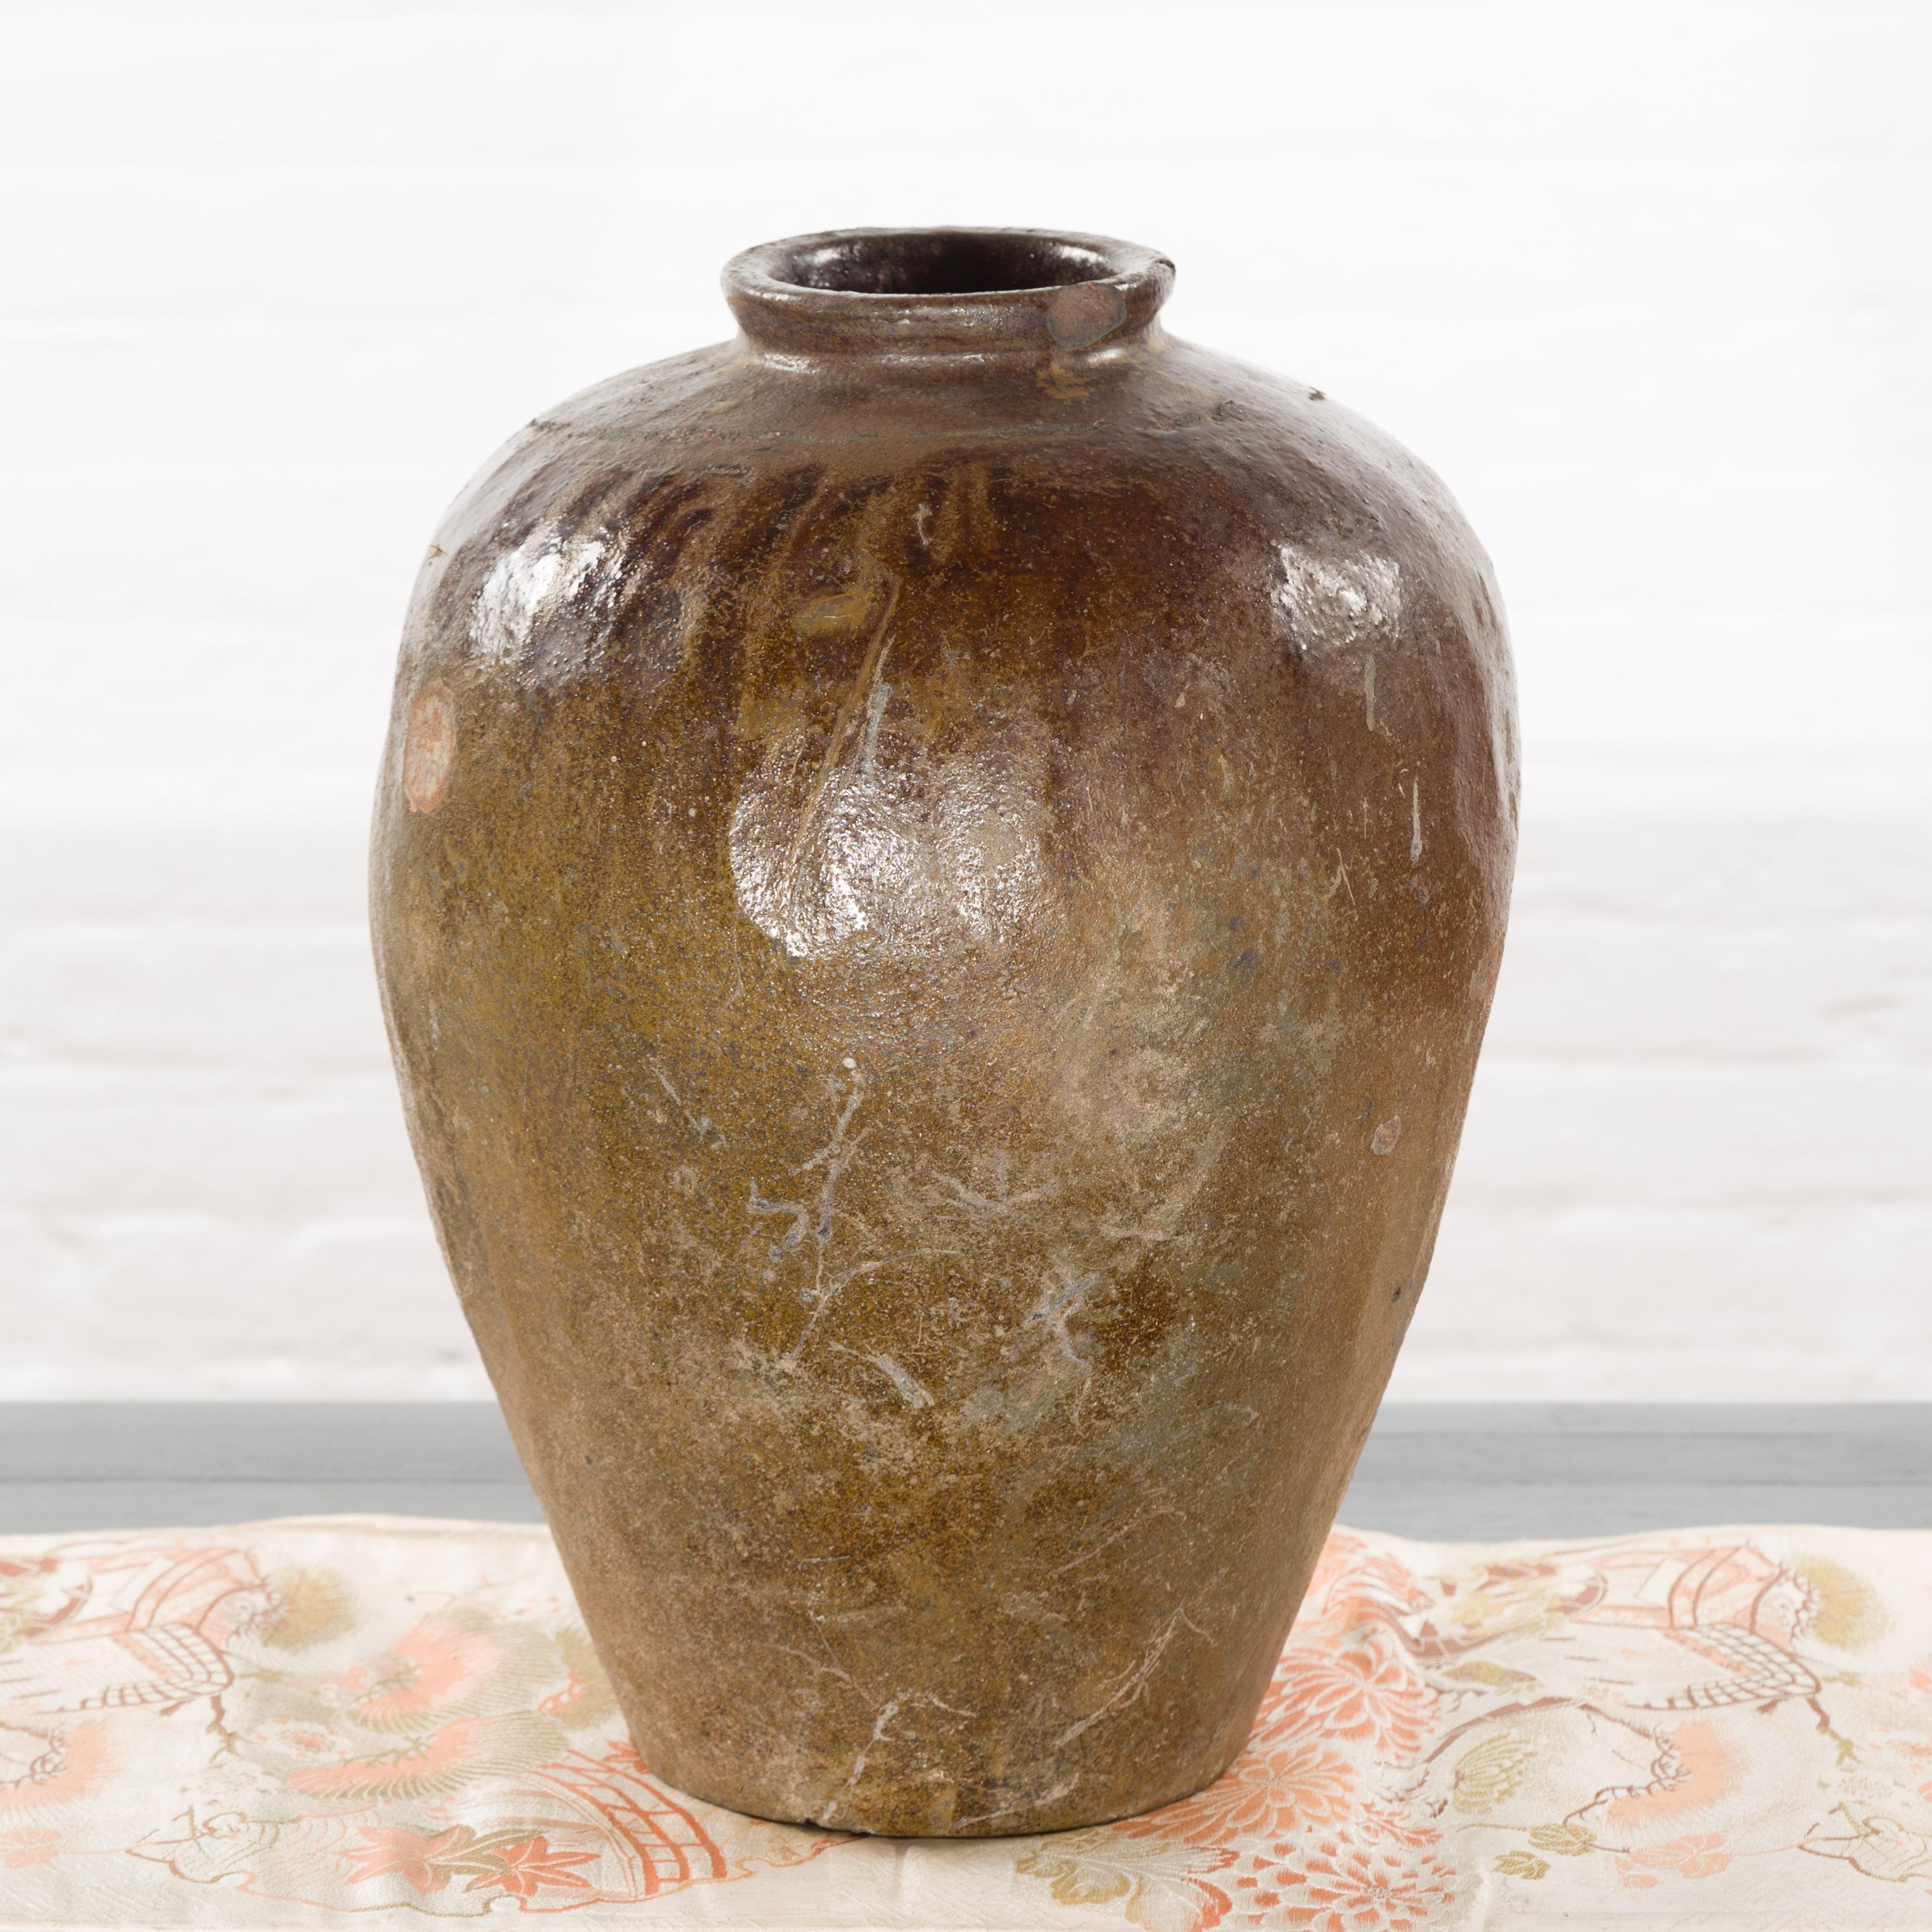 Antique Japanese 19th Century Brown Glazed Water Jar with Distressed Appearance For Sale 5